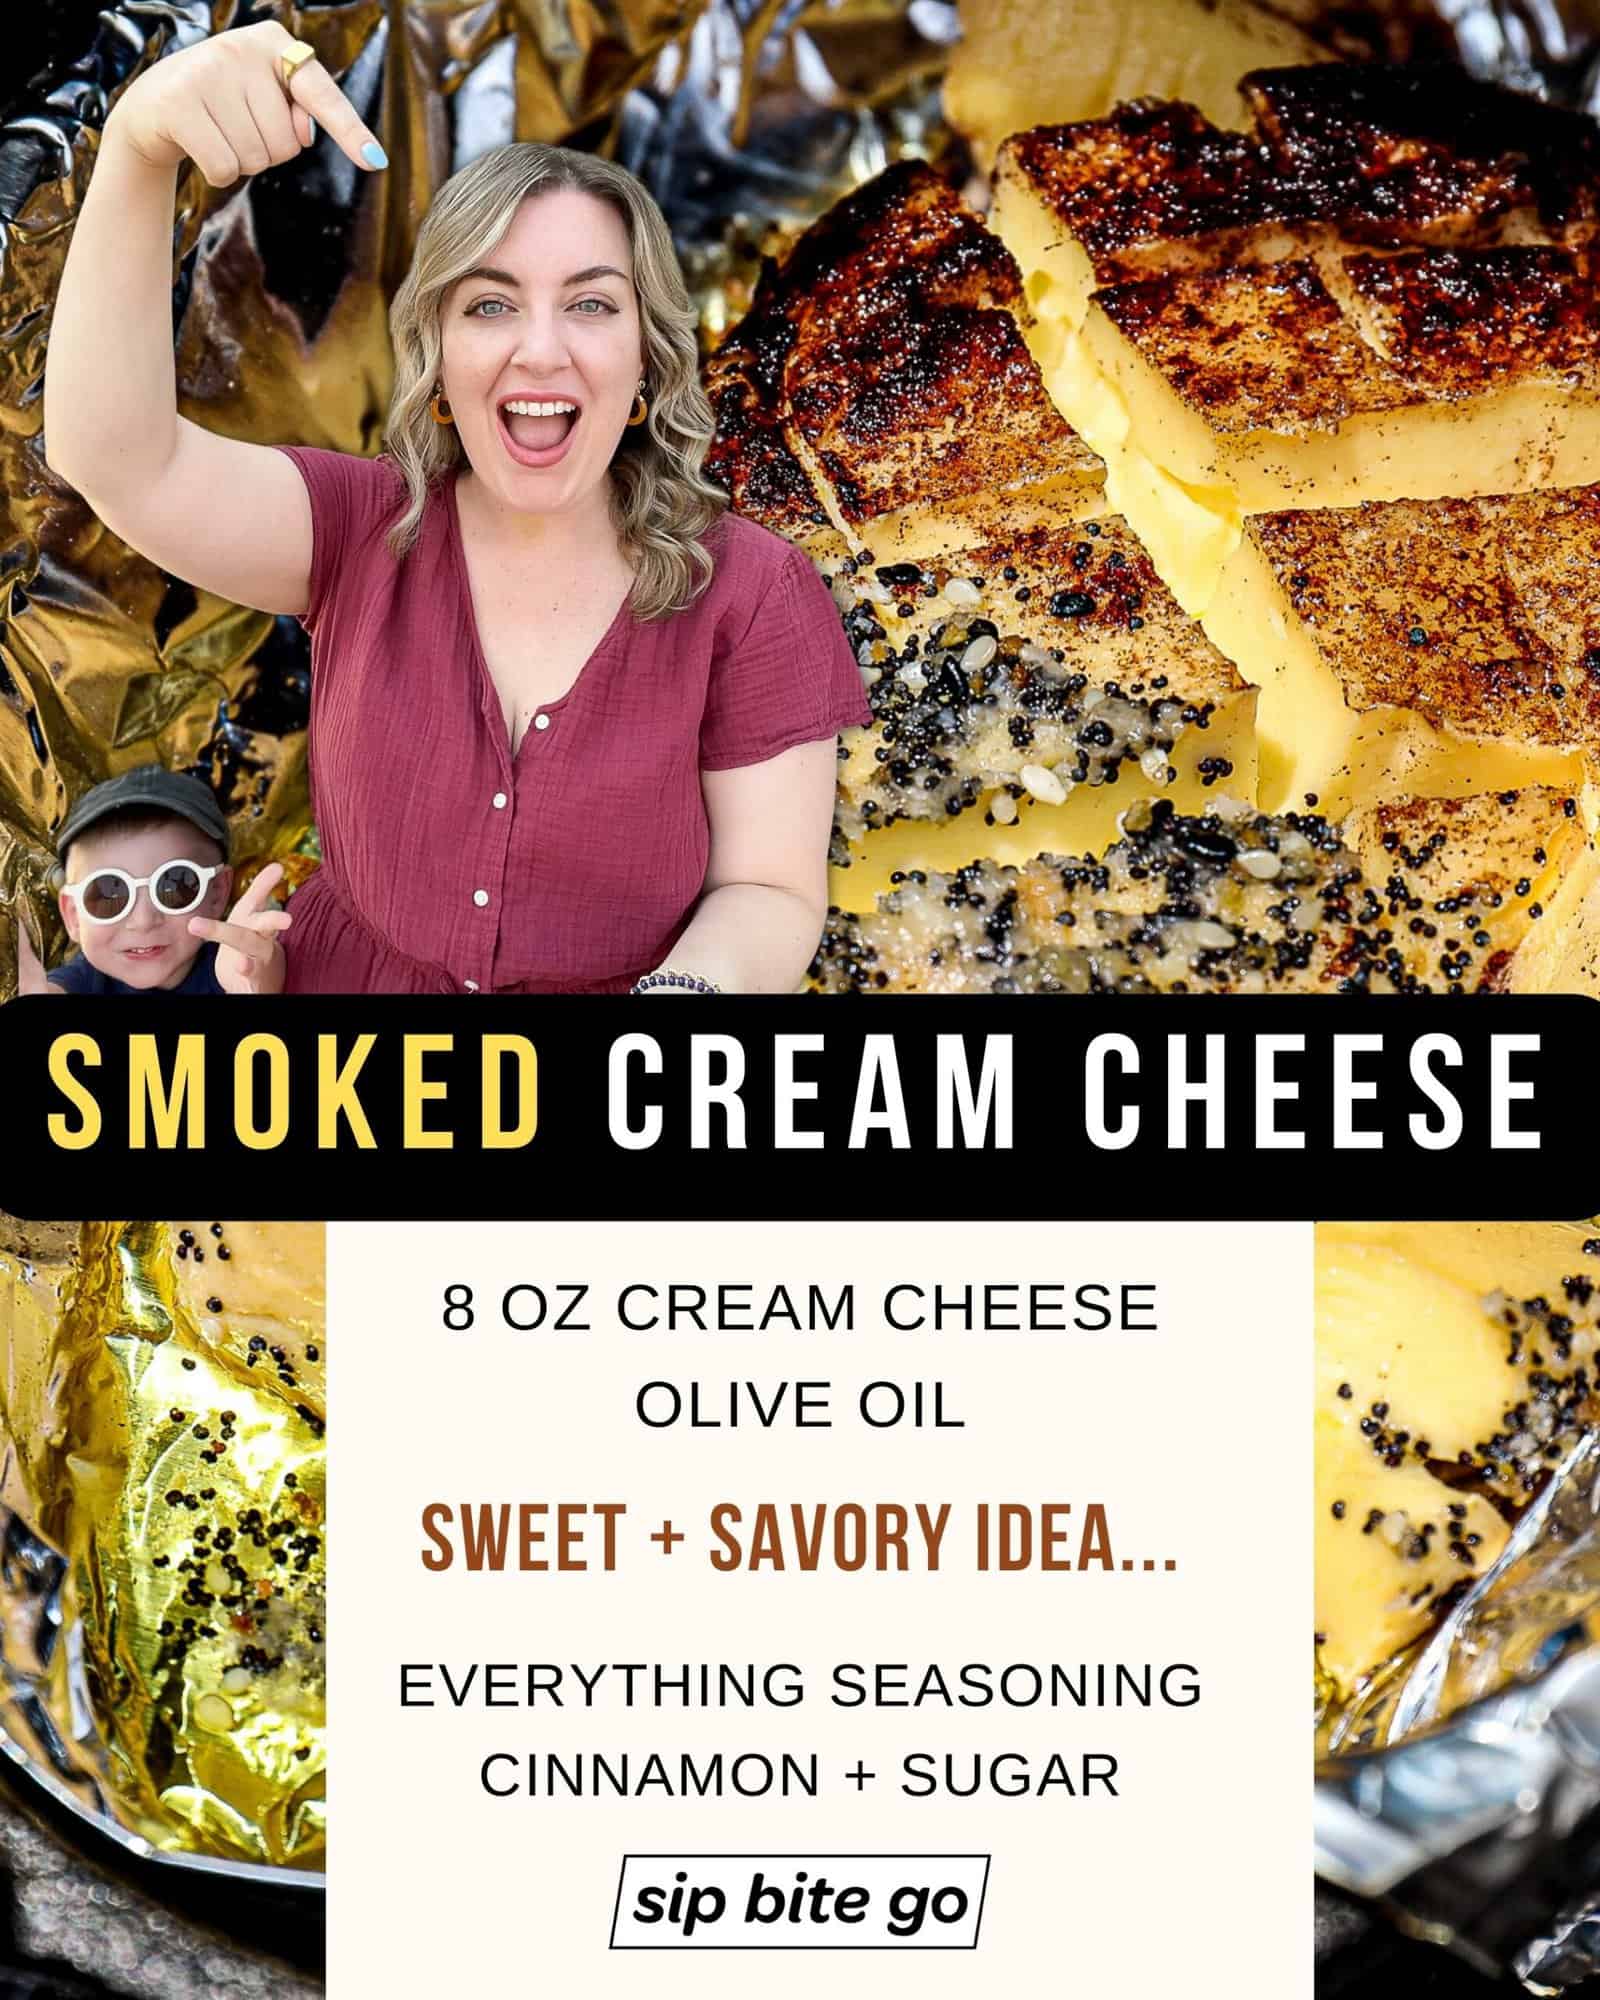 Infographic with list of ingredients and recipe photos of Traeger smoked cream cheese with sweet and savory toppings